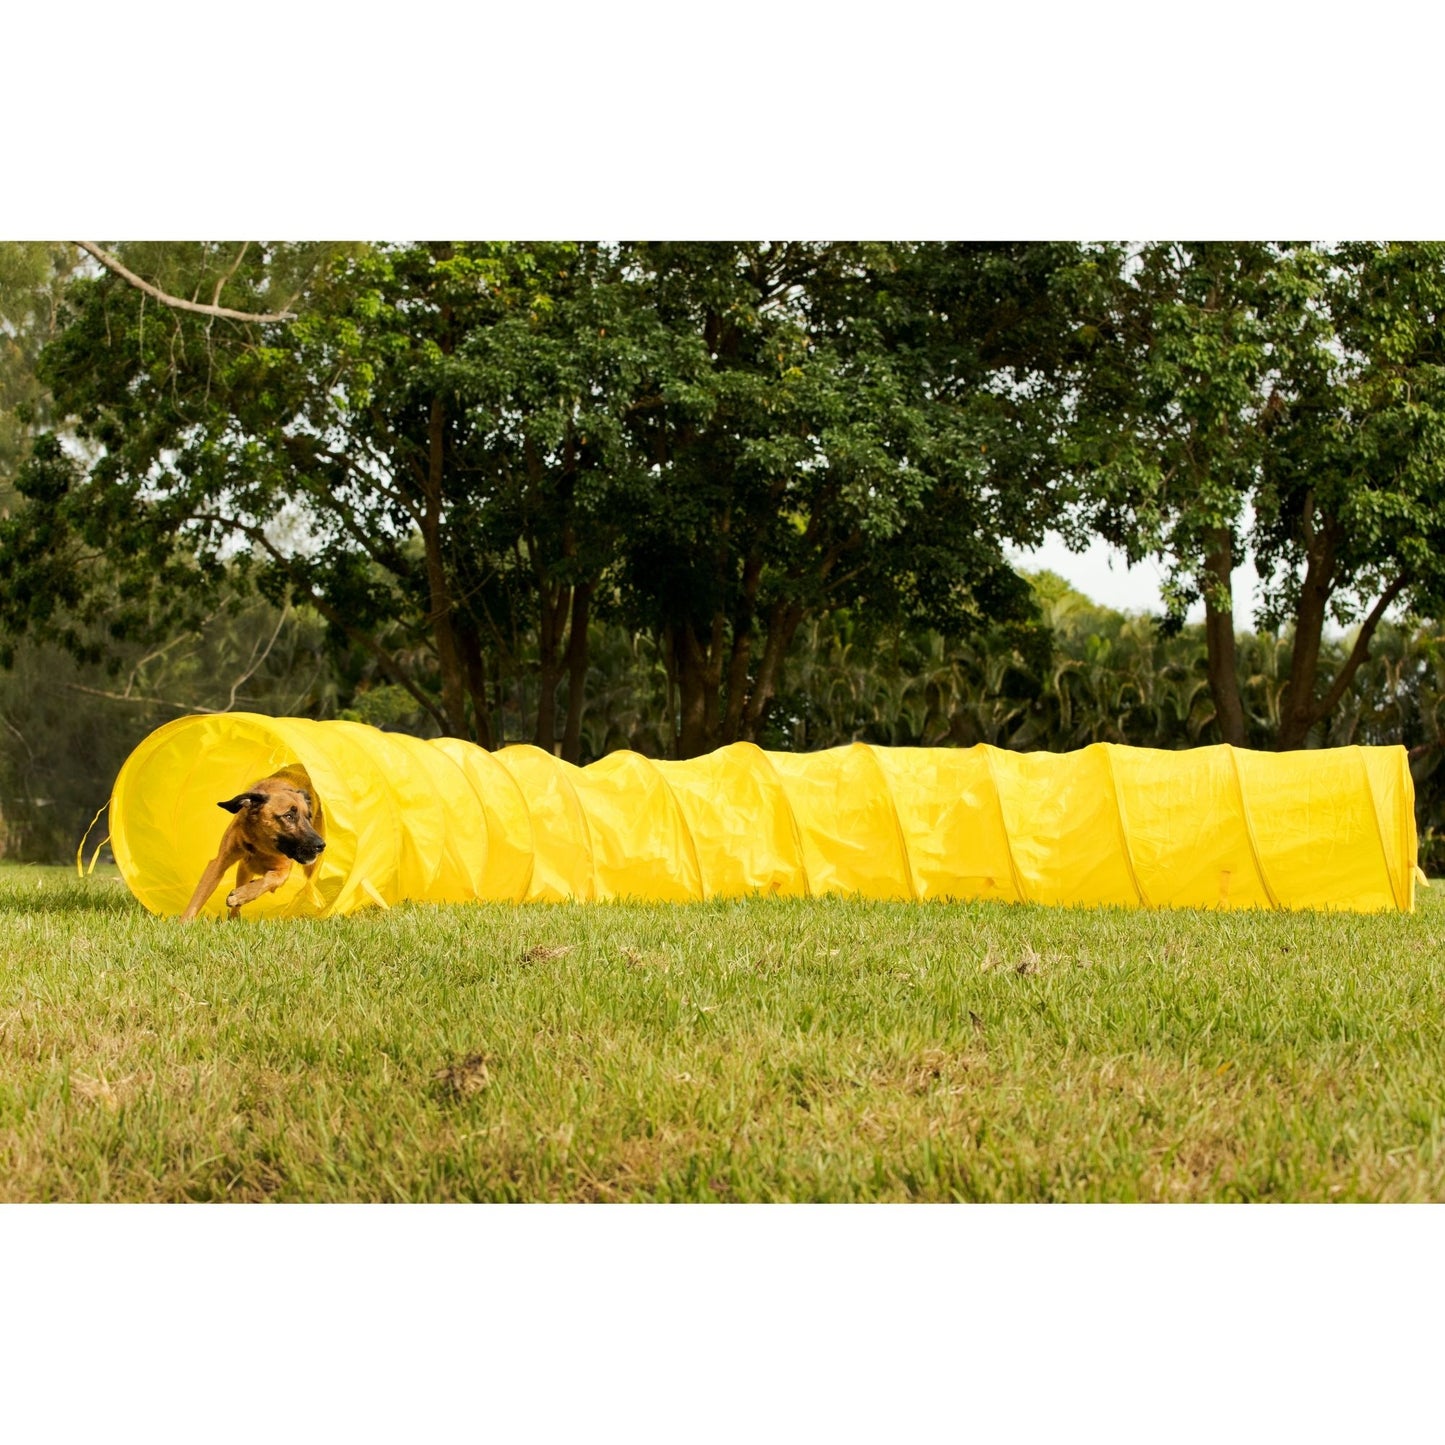 Midlee Dog Agility Tunnel with Stakes & Carry Bag, 17' Long